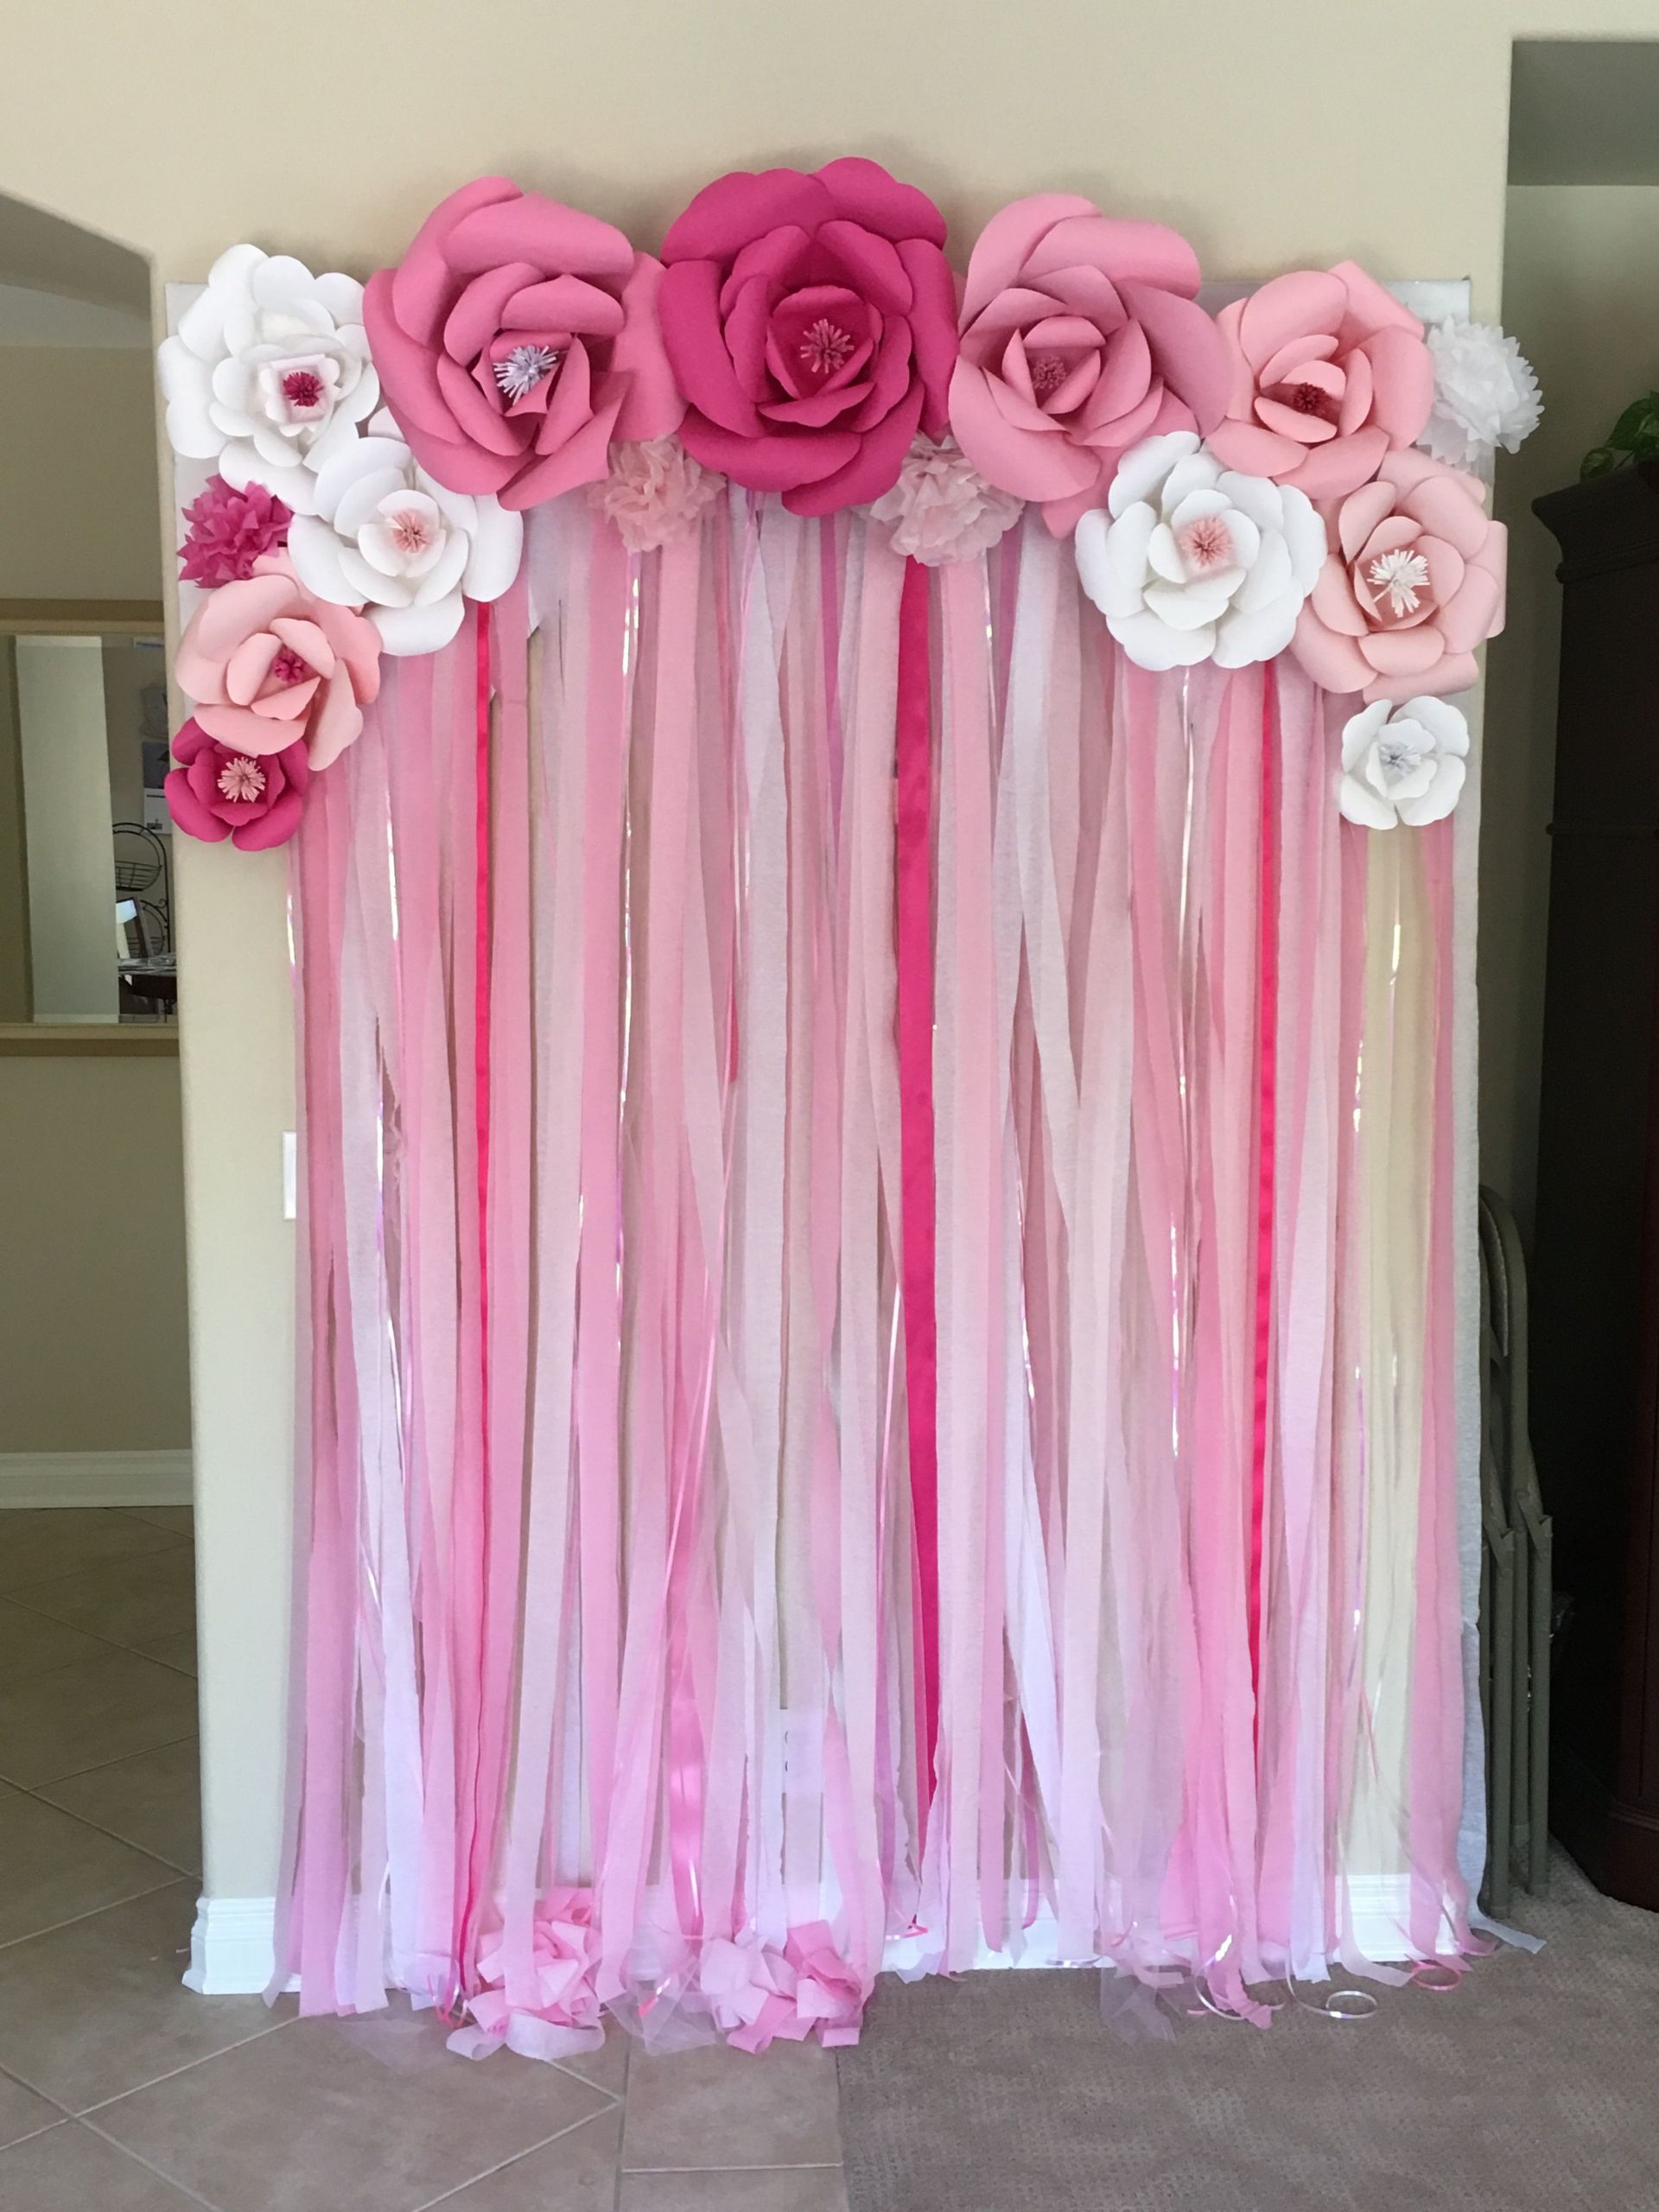 DIY Girl Baby Shower Decorations
 backdrop for a girl baby shower